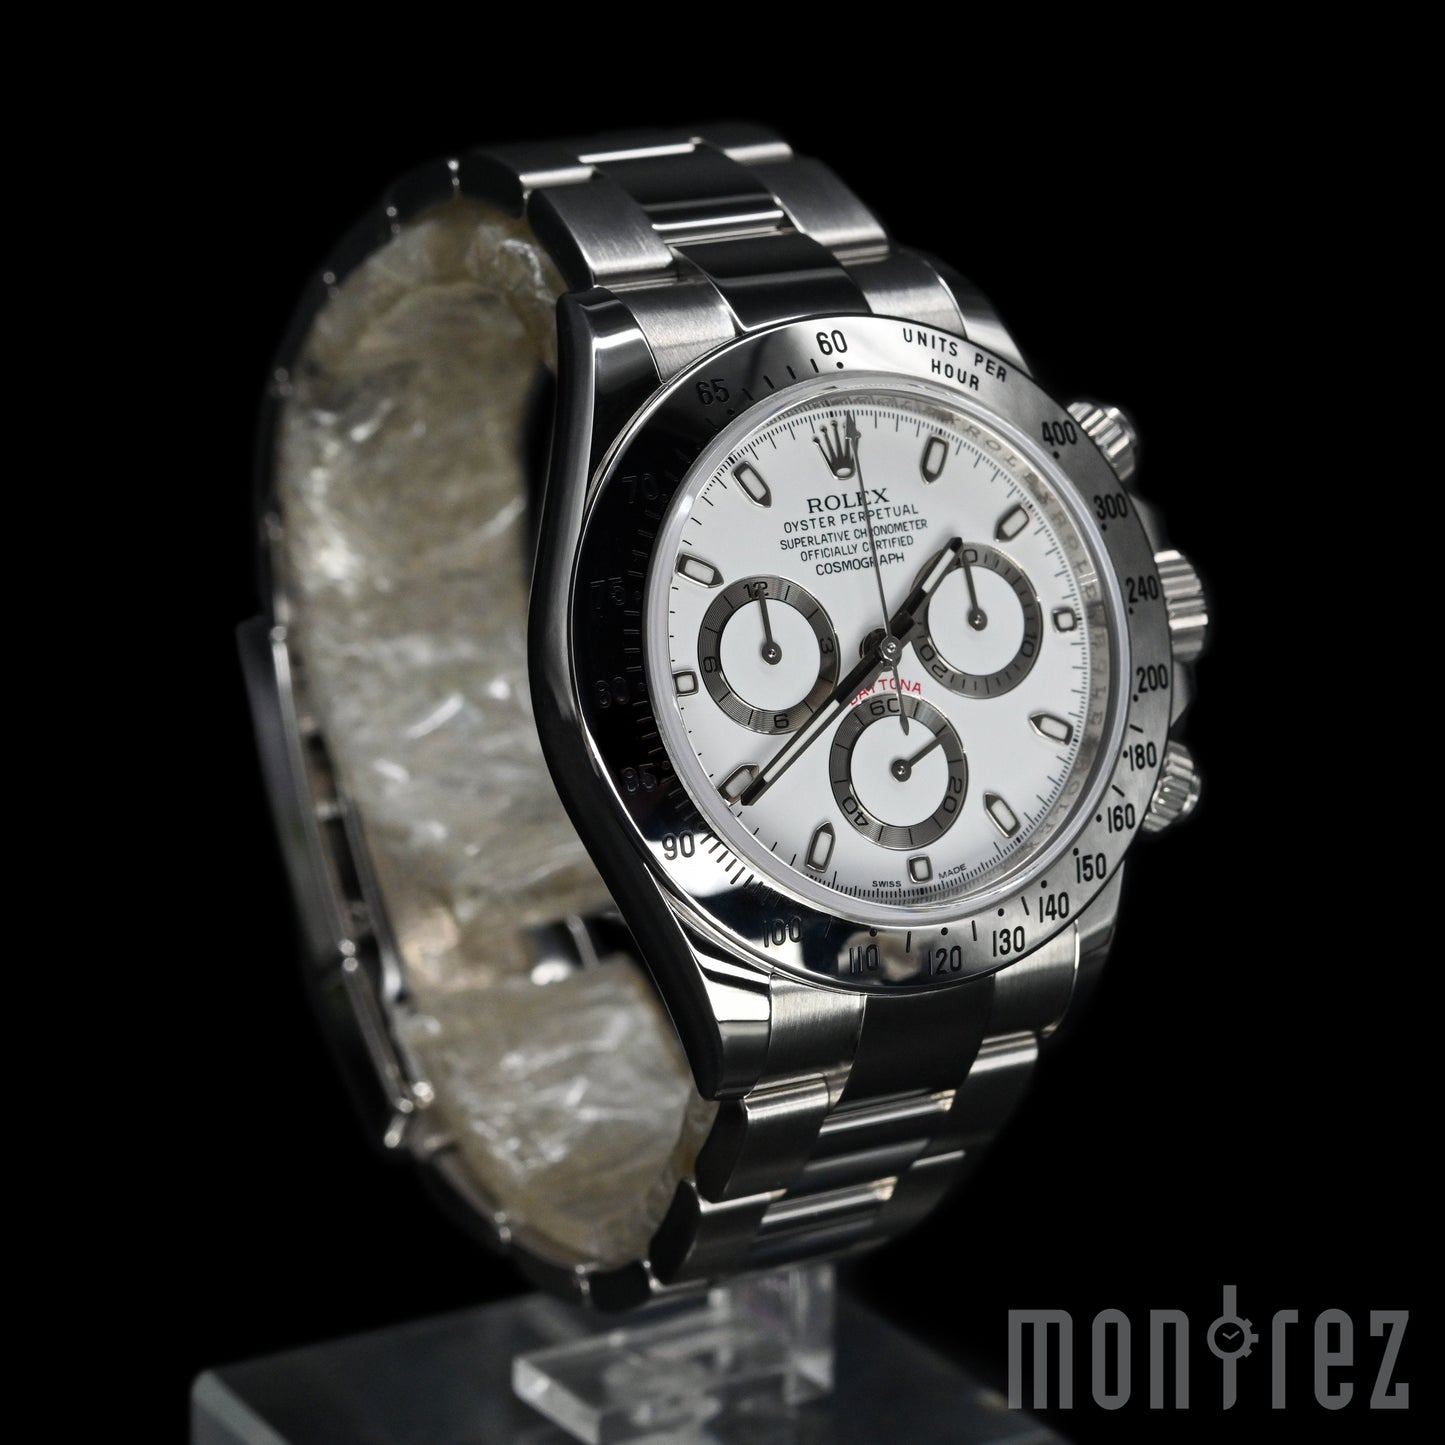 [Pre-Owned Watch] Rolex Cosmograph Daytona 40mm 116520 White "APH" Dial (Out of Production)